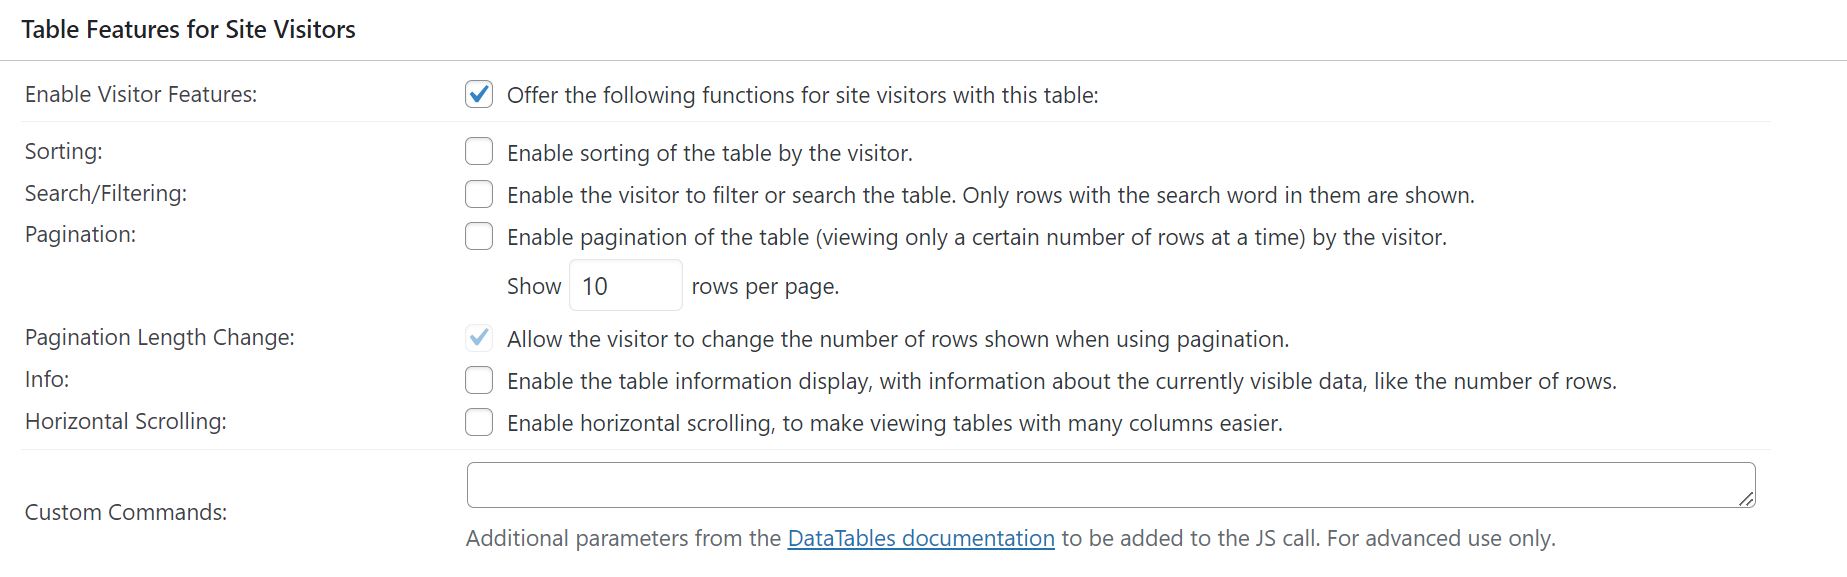 Table Features for Site Visitors menu, full description on page